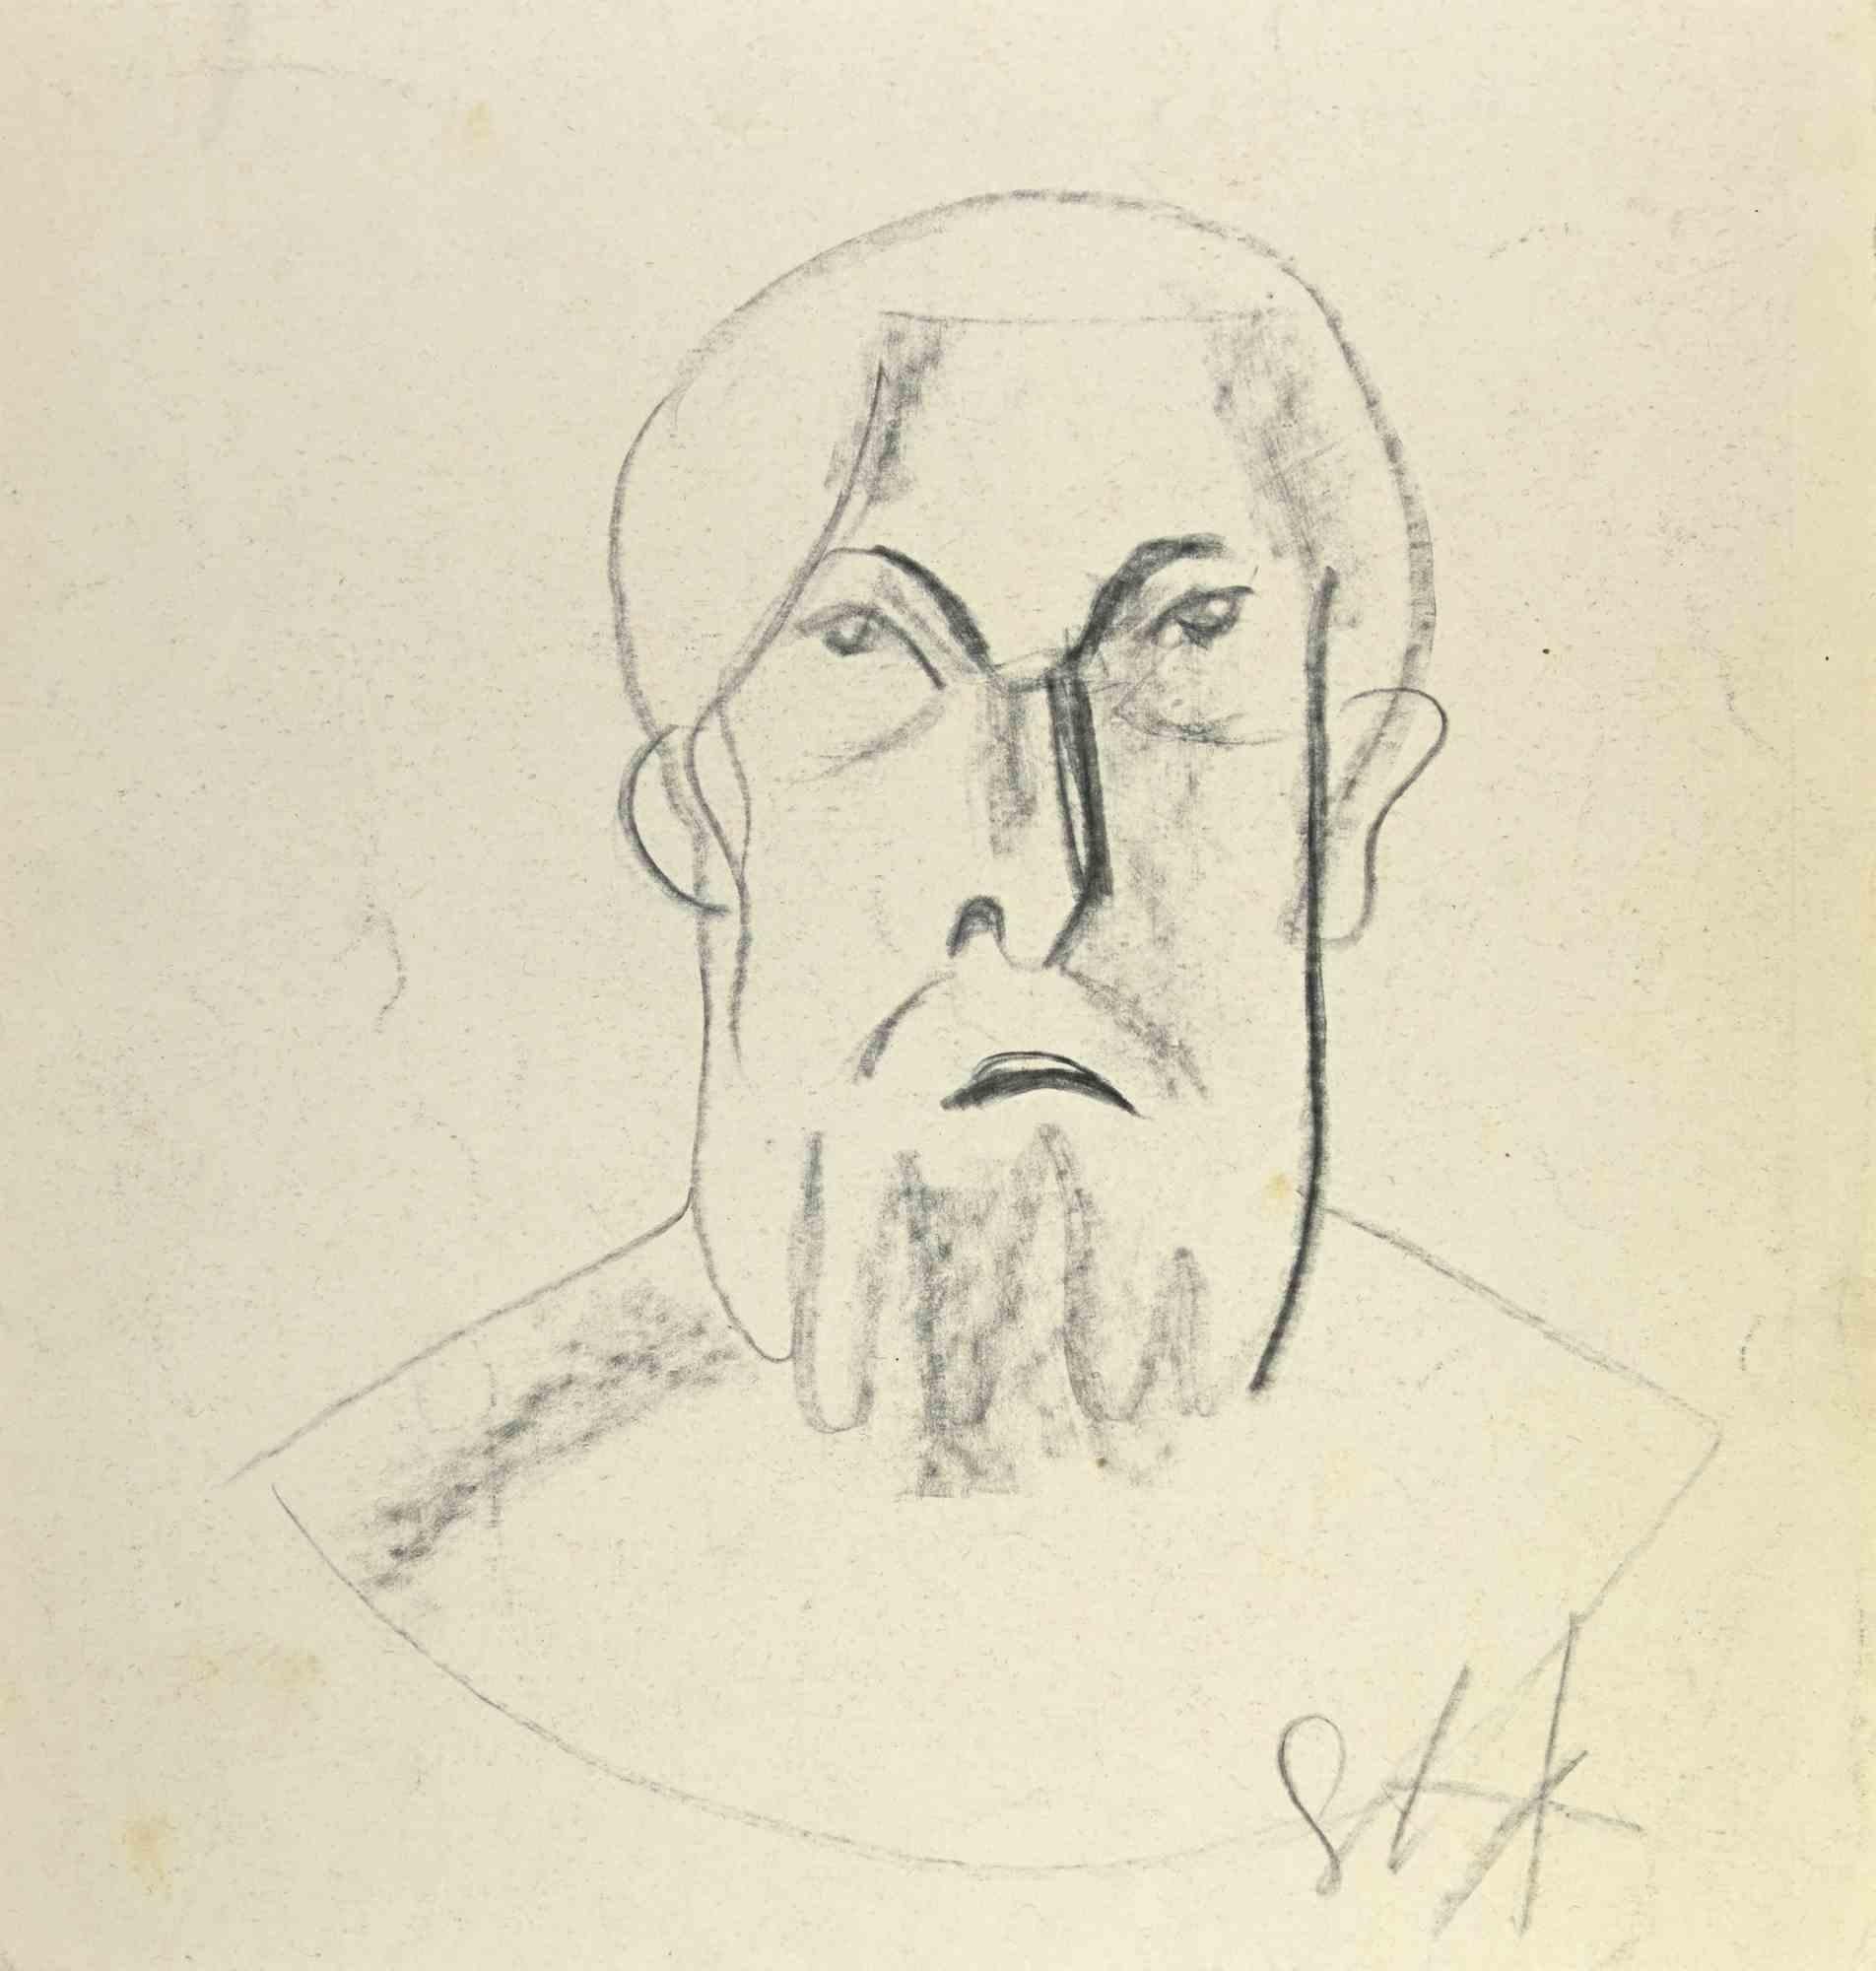 Louis Berthomme Saint-Andre Figurative Art - The  Old Man's Face - Drawing by L. B. Saint-André - Mid 20th Century